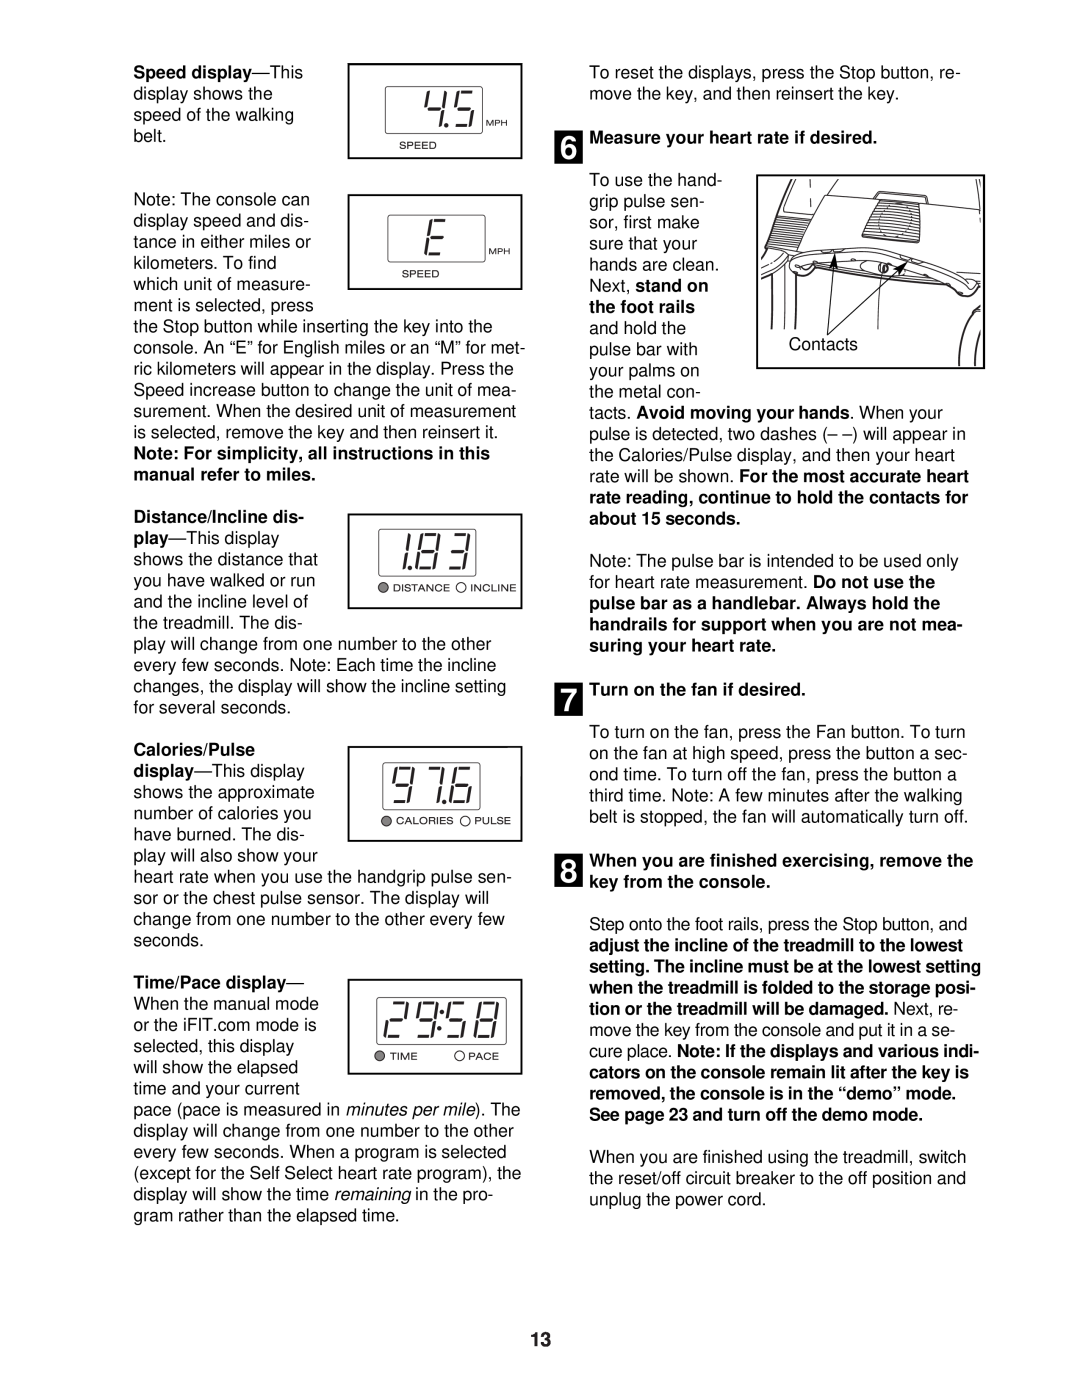 ProForm DTL62940 Speed display-This, Note For simplicity, all instructions in this manual refer to miles, Calories/Pulse 